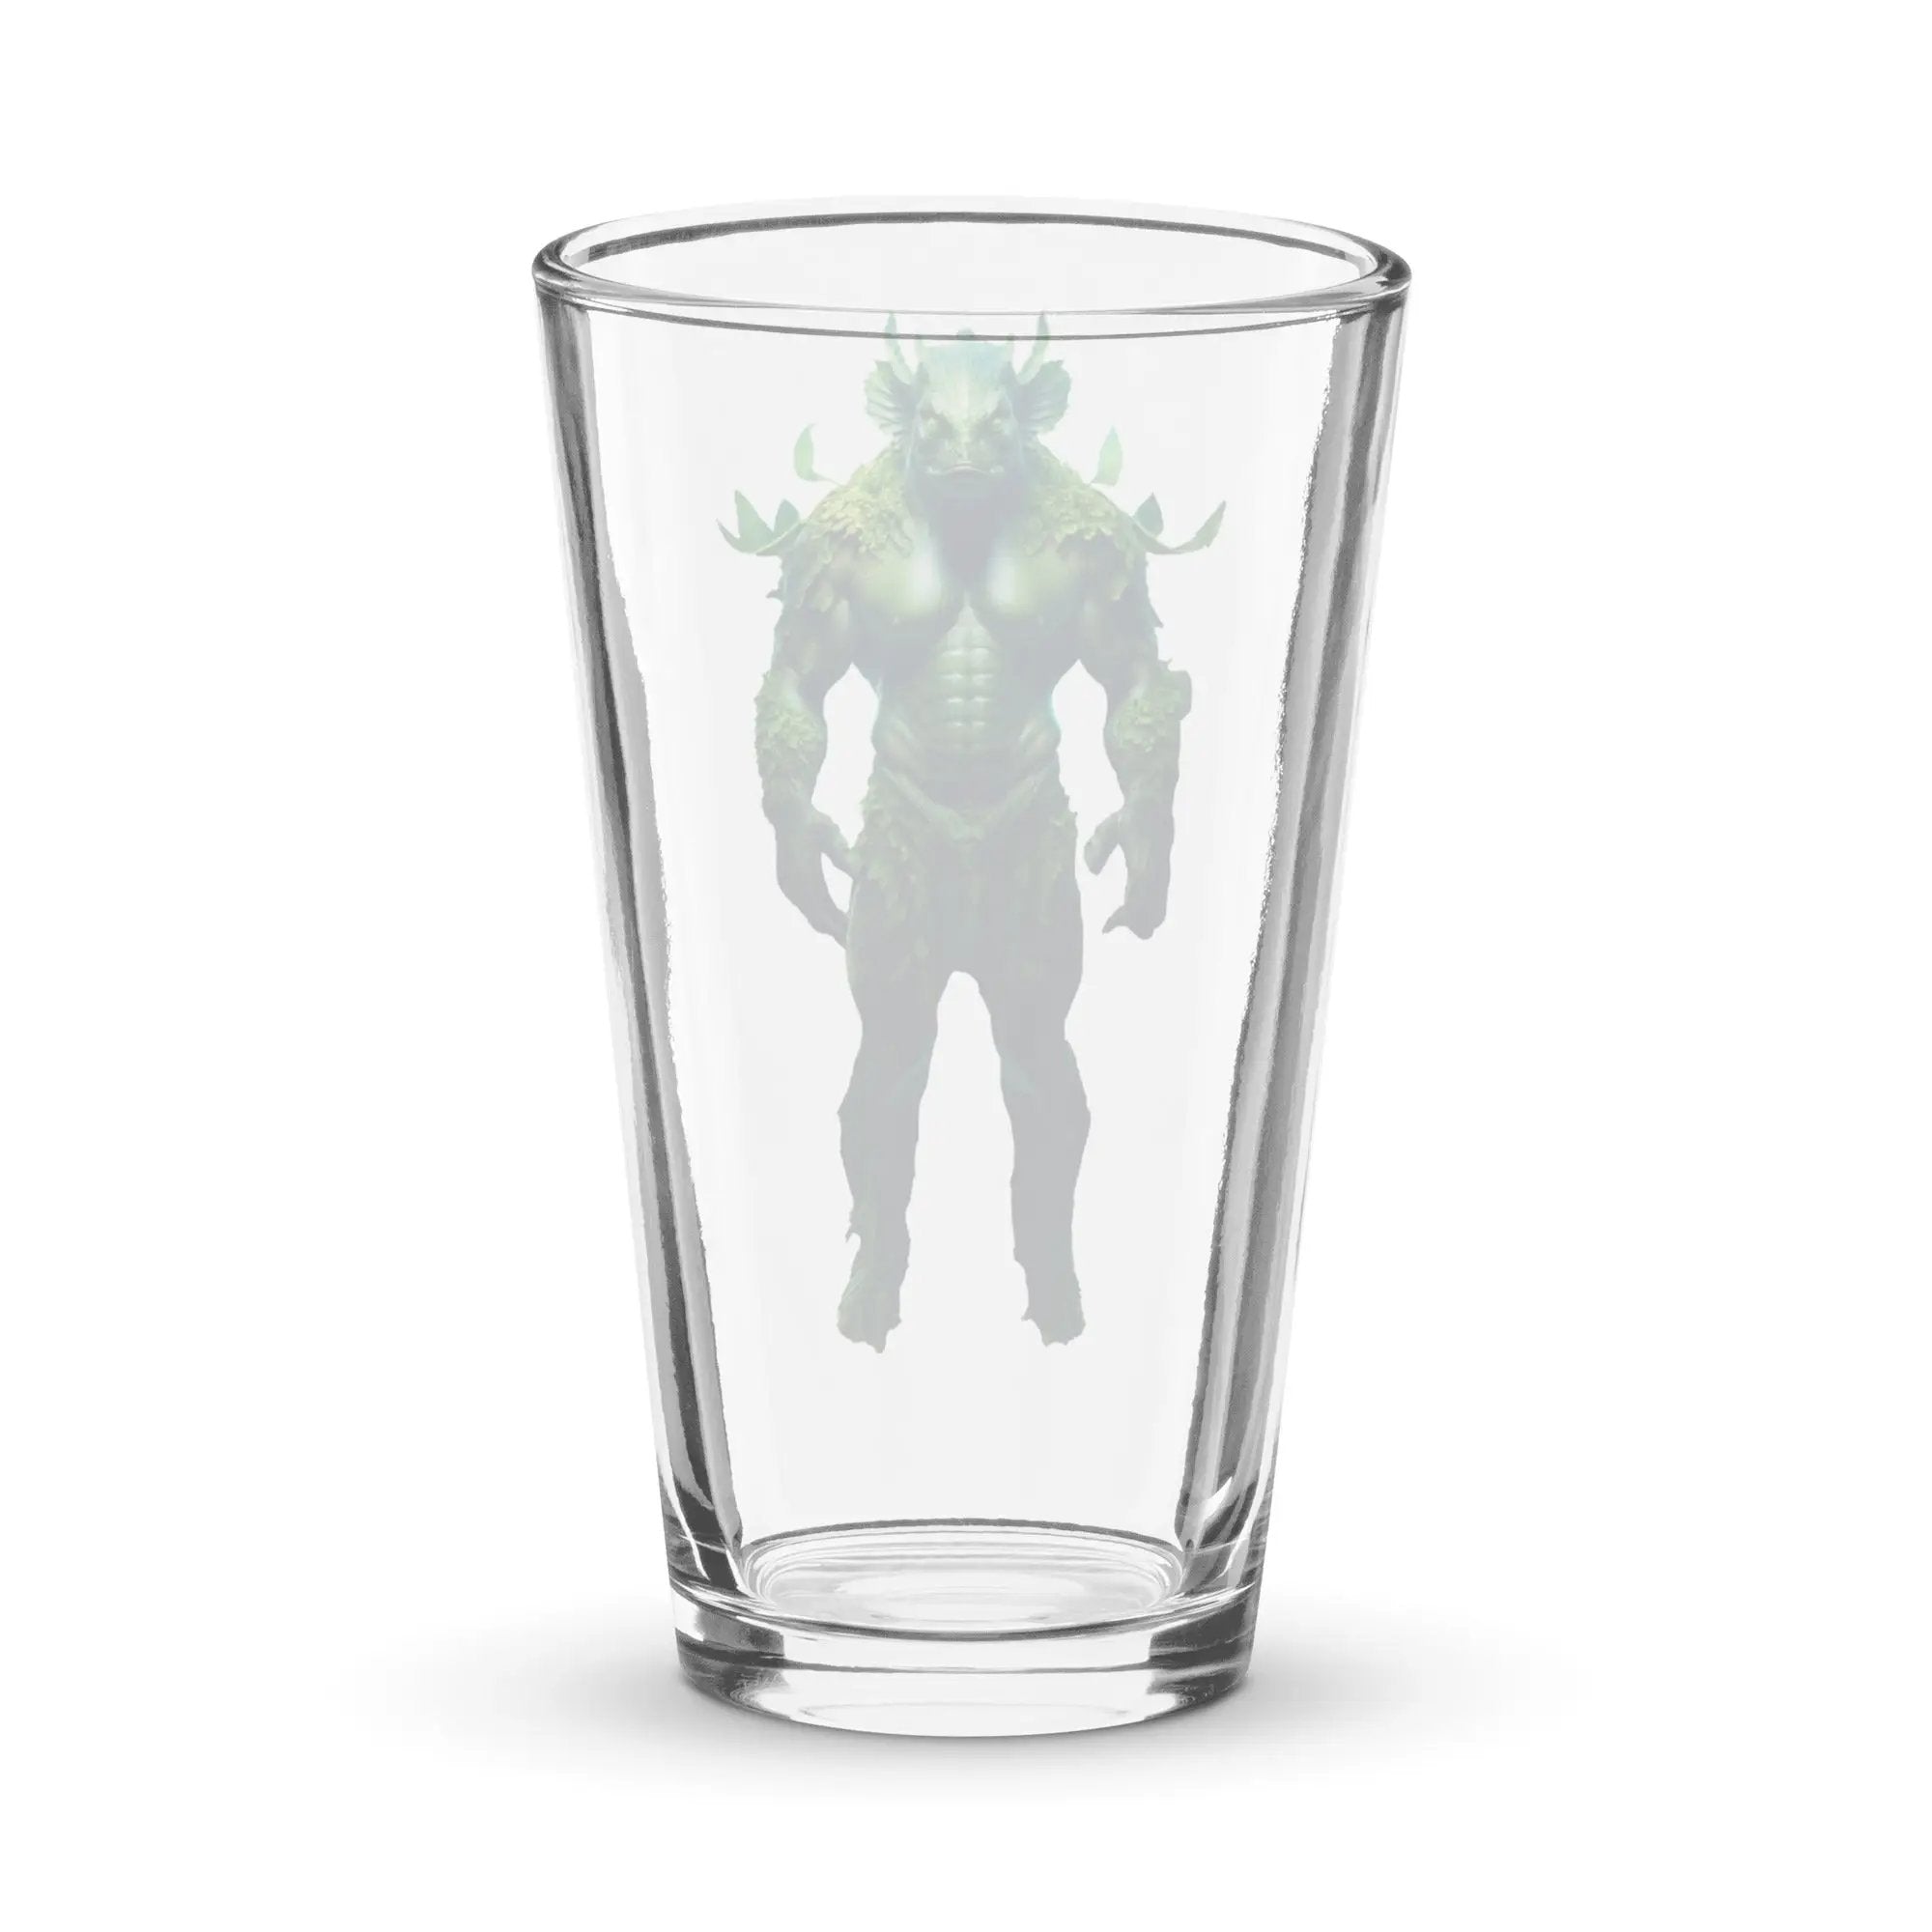 The Monster Squad "The Creature" Shaker Pint Glass